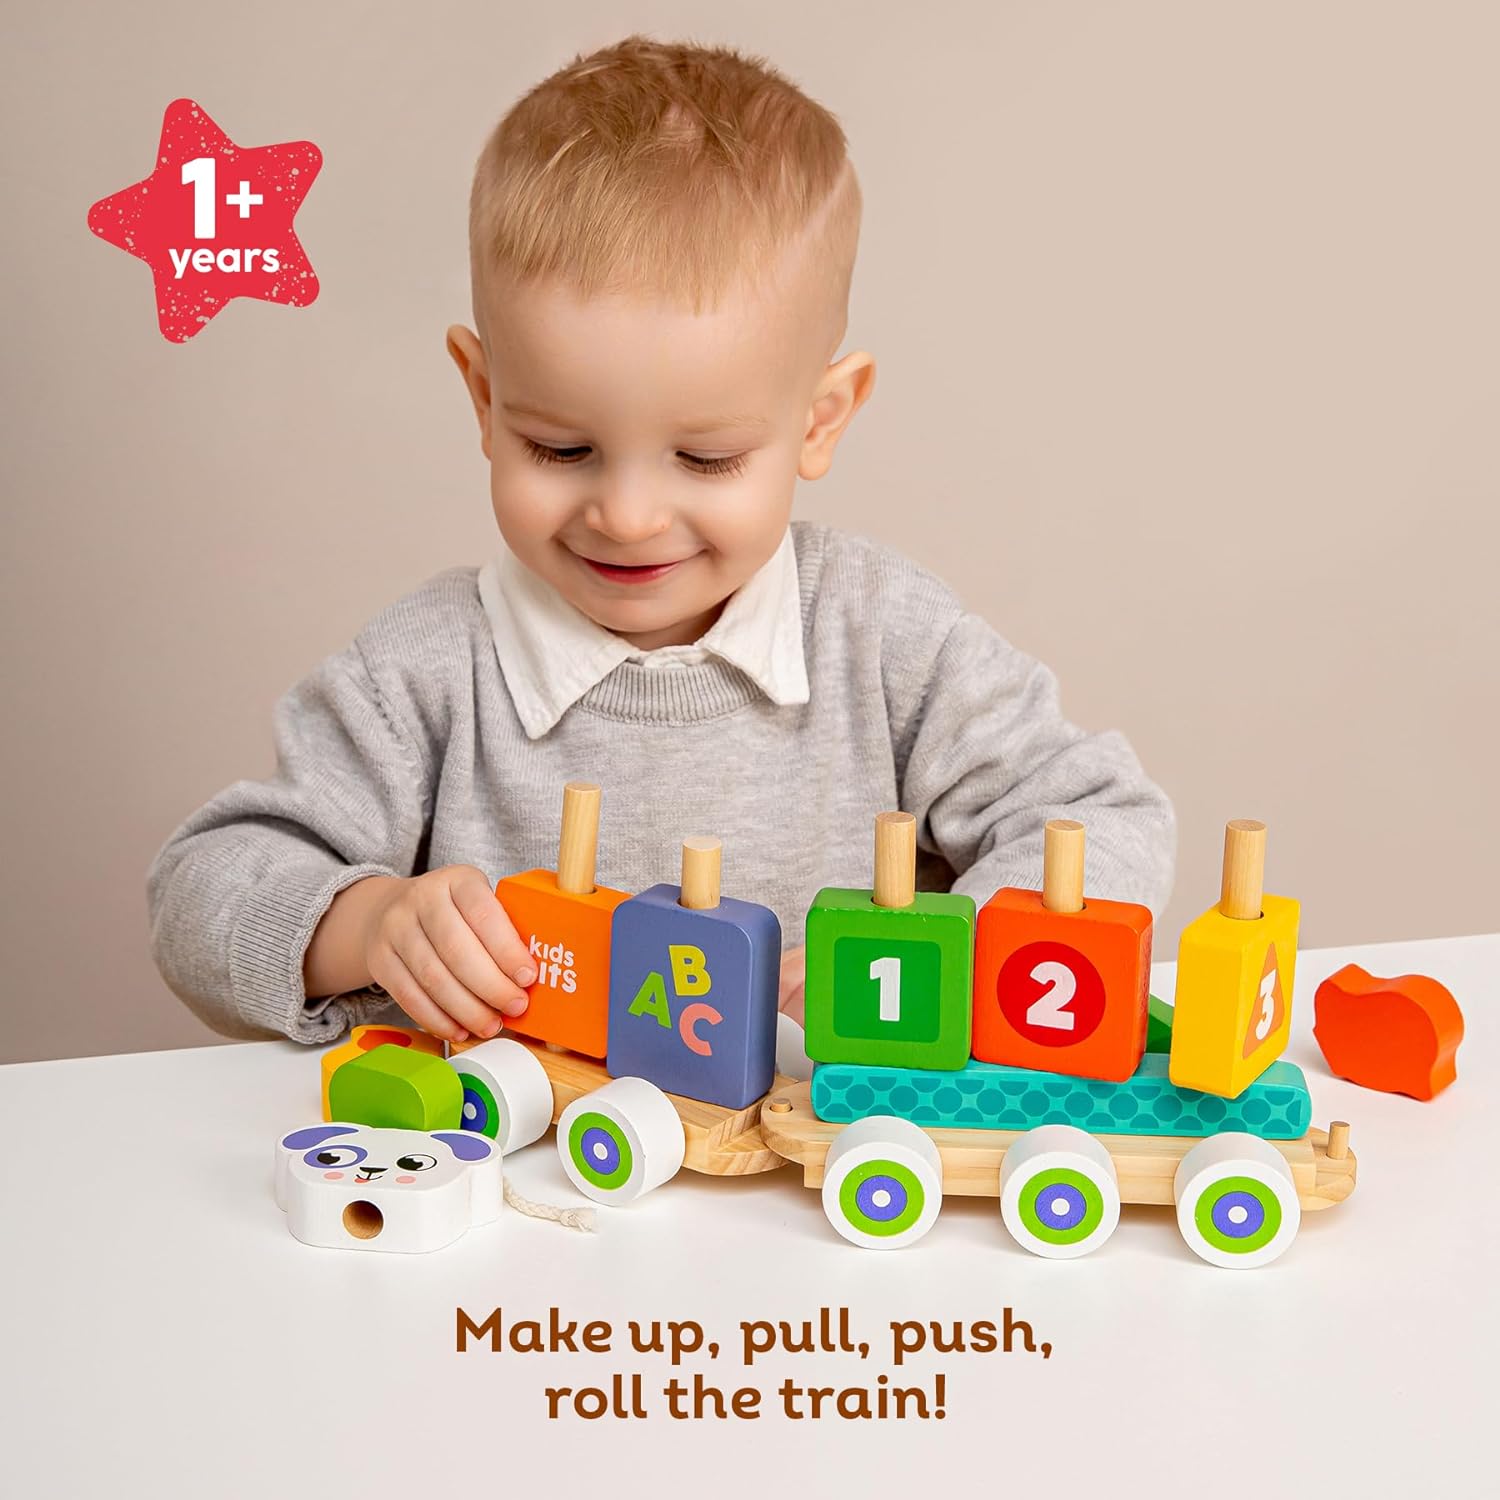 Kids Hits Wooden Stack and Go Train: All Aboard The Fun Learning Journey for Ages 1 and Up